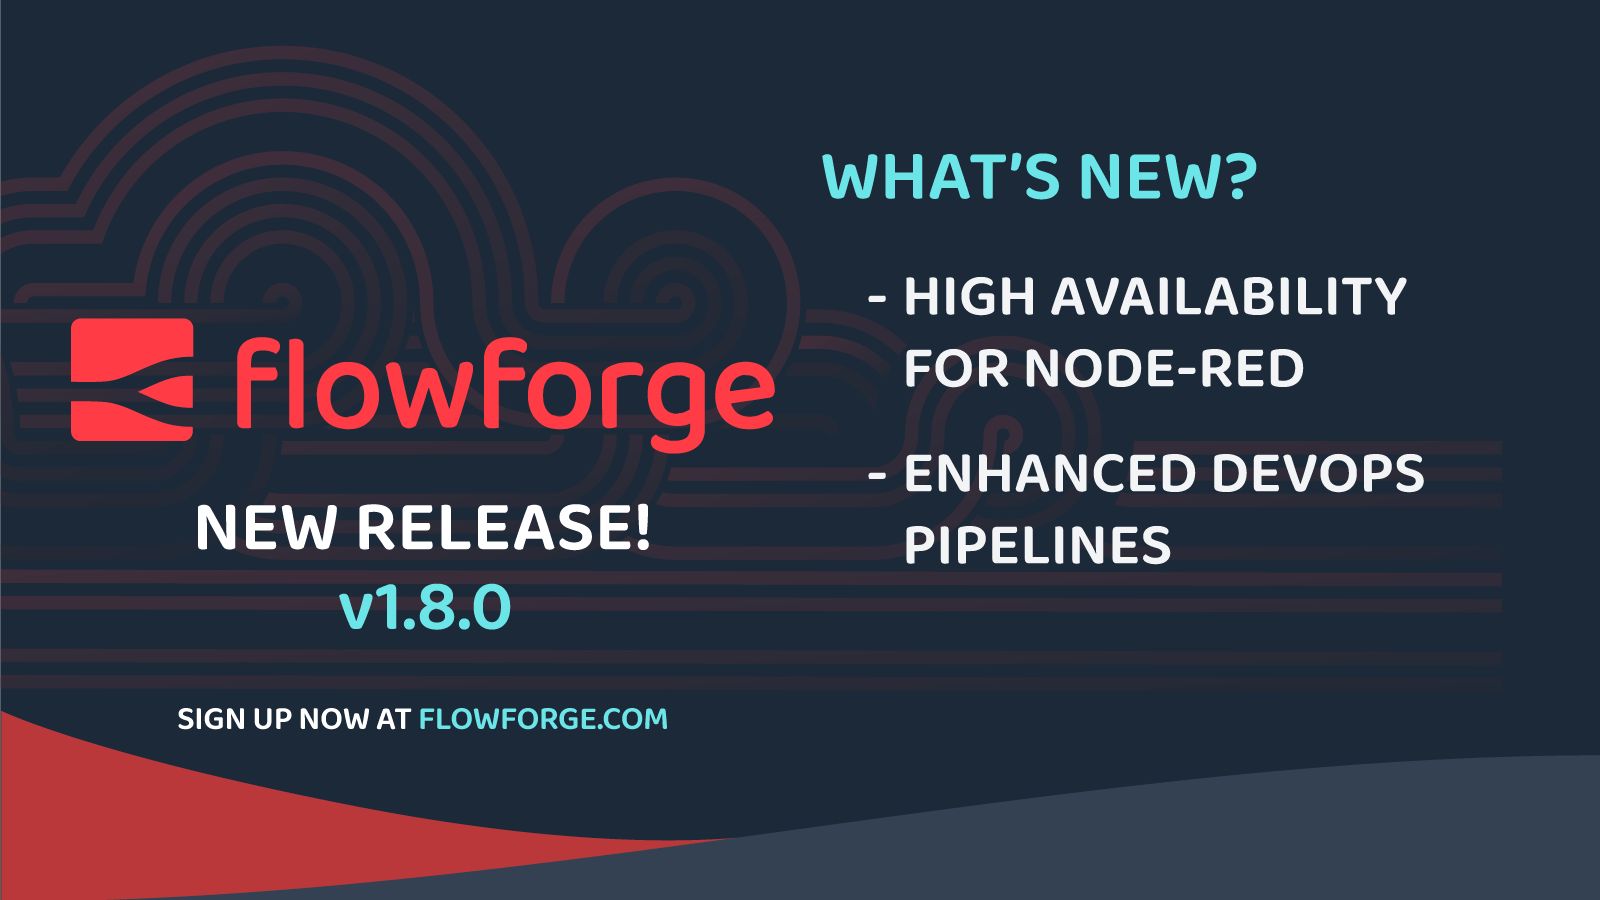 Image representing FlowFuse now offers High Availability Node-RED